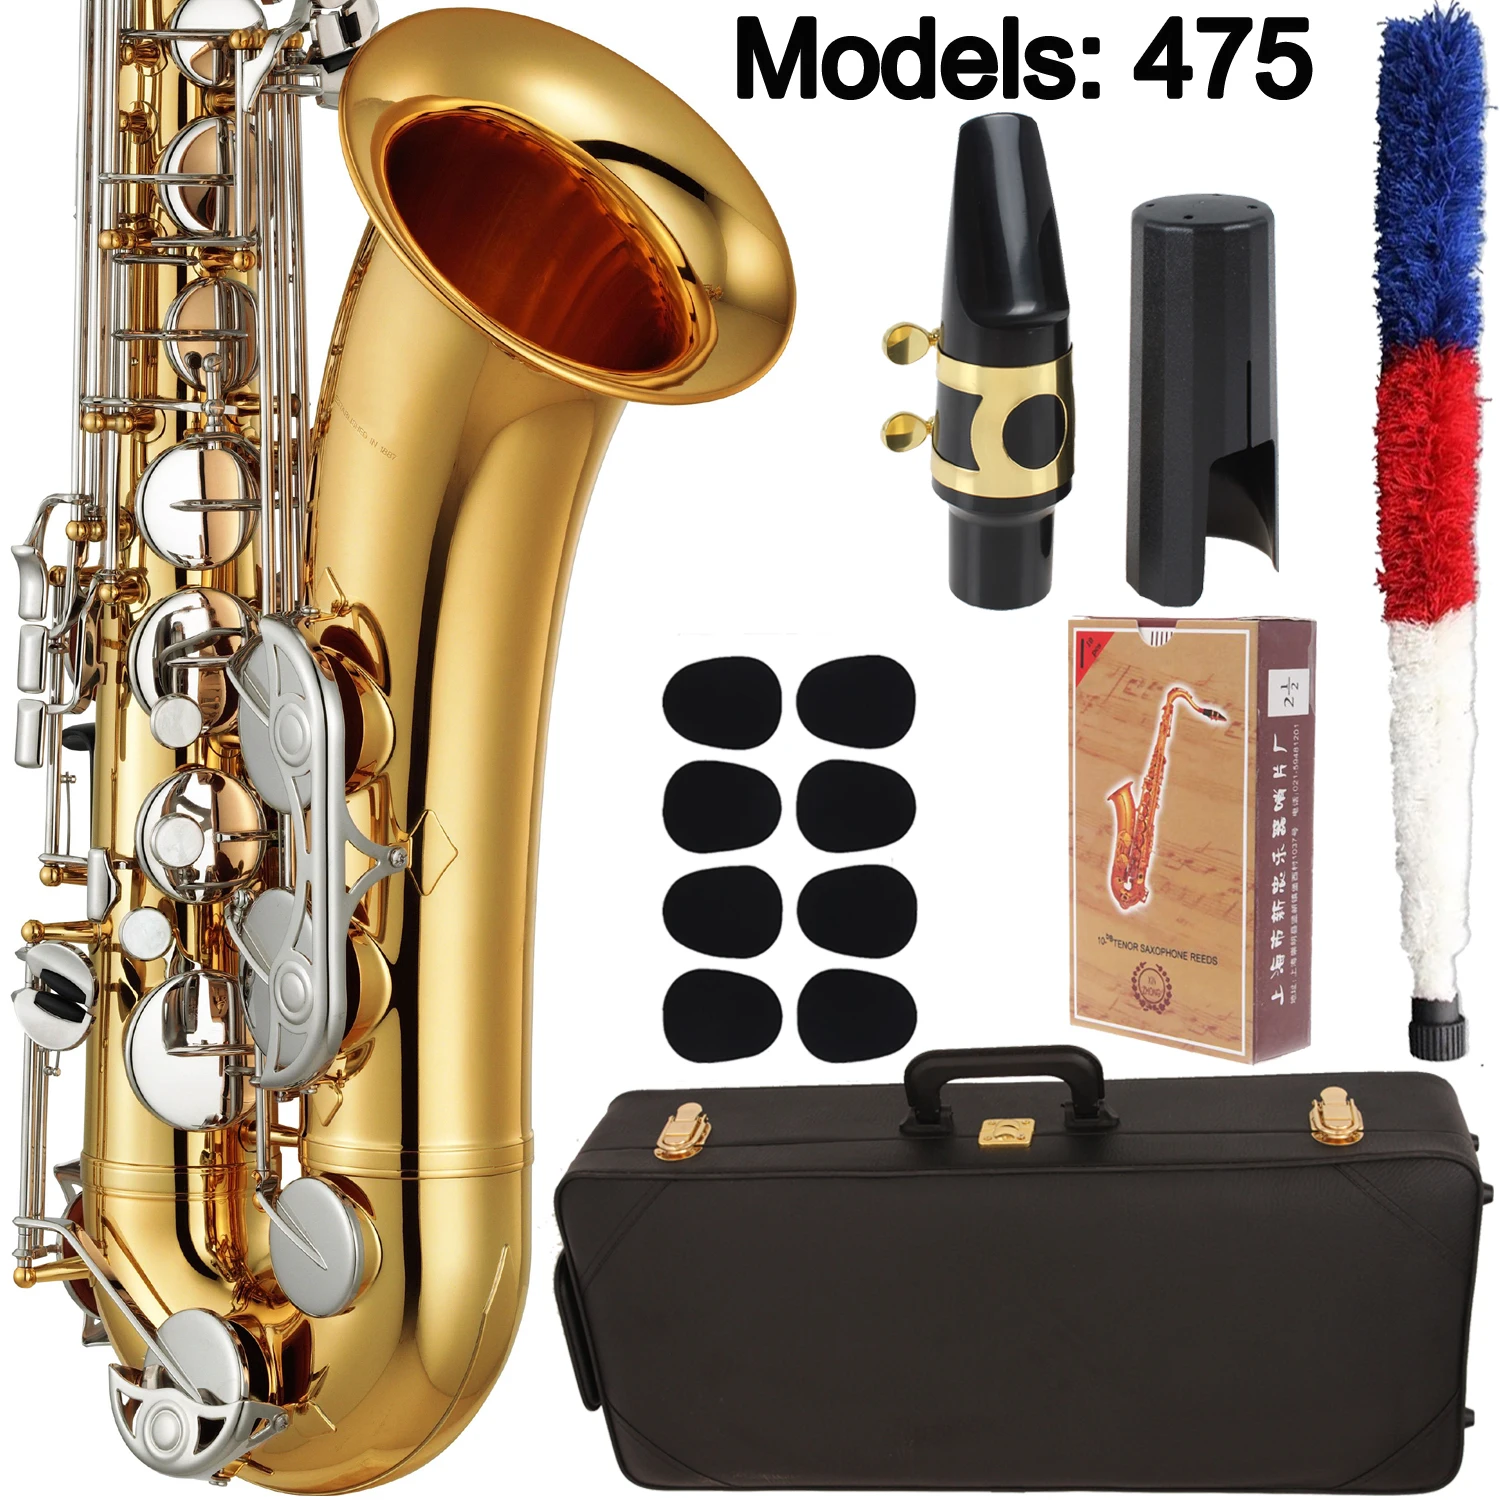 

MFC Tenor Saxophone 475 Gold Lacquer Nickel-plated Key Sax Tenor Mouthpiece Ligature Reeds Neck Musical Instrument Accessories